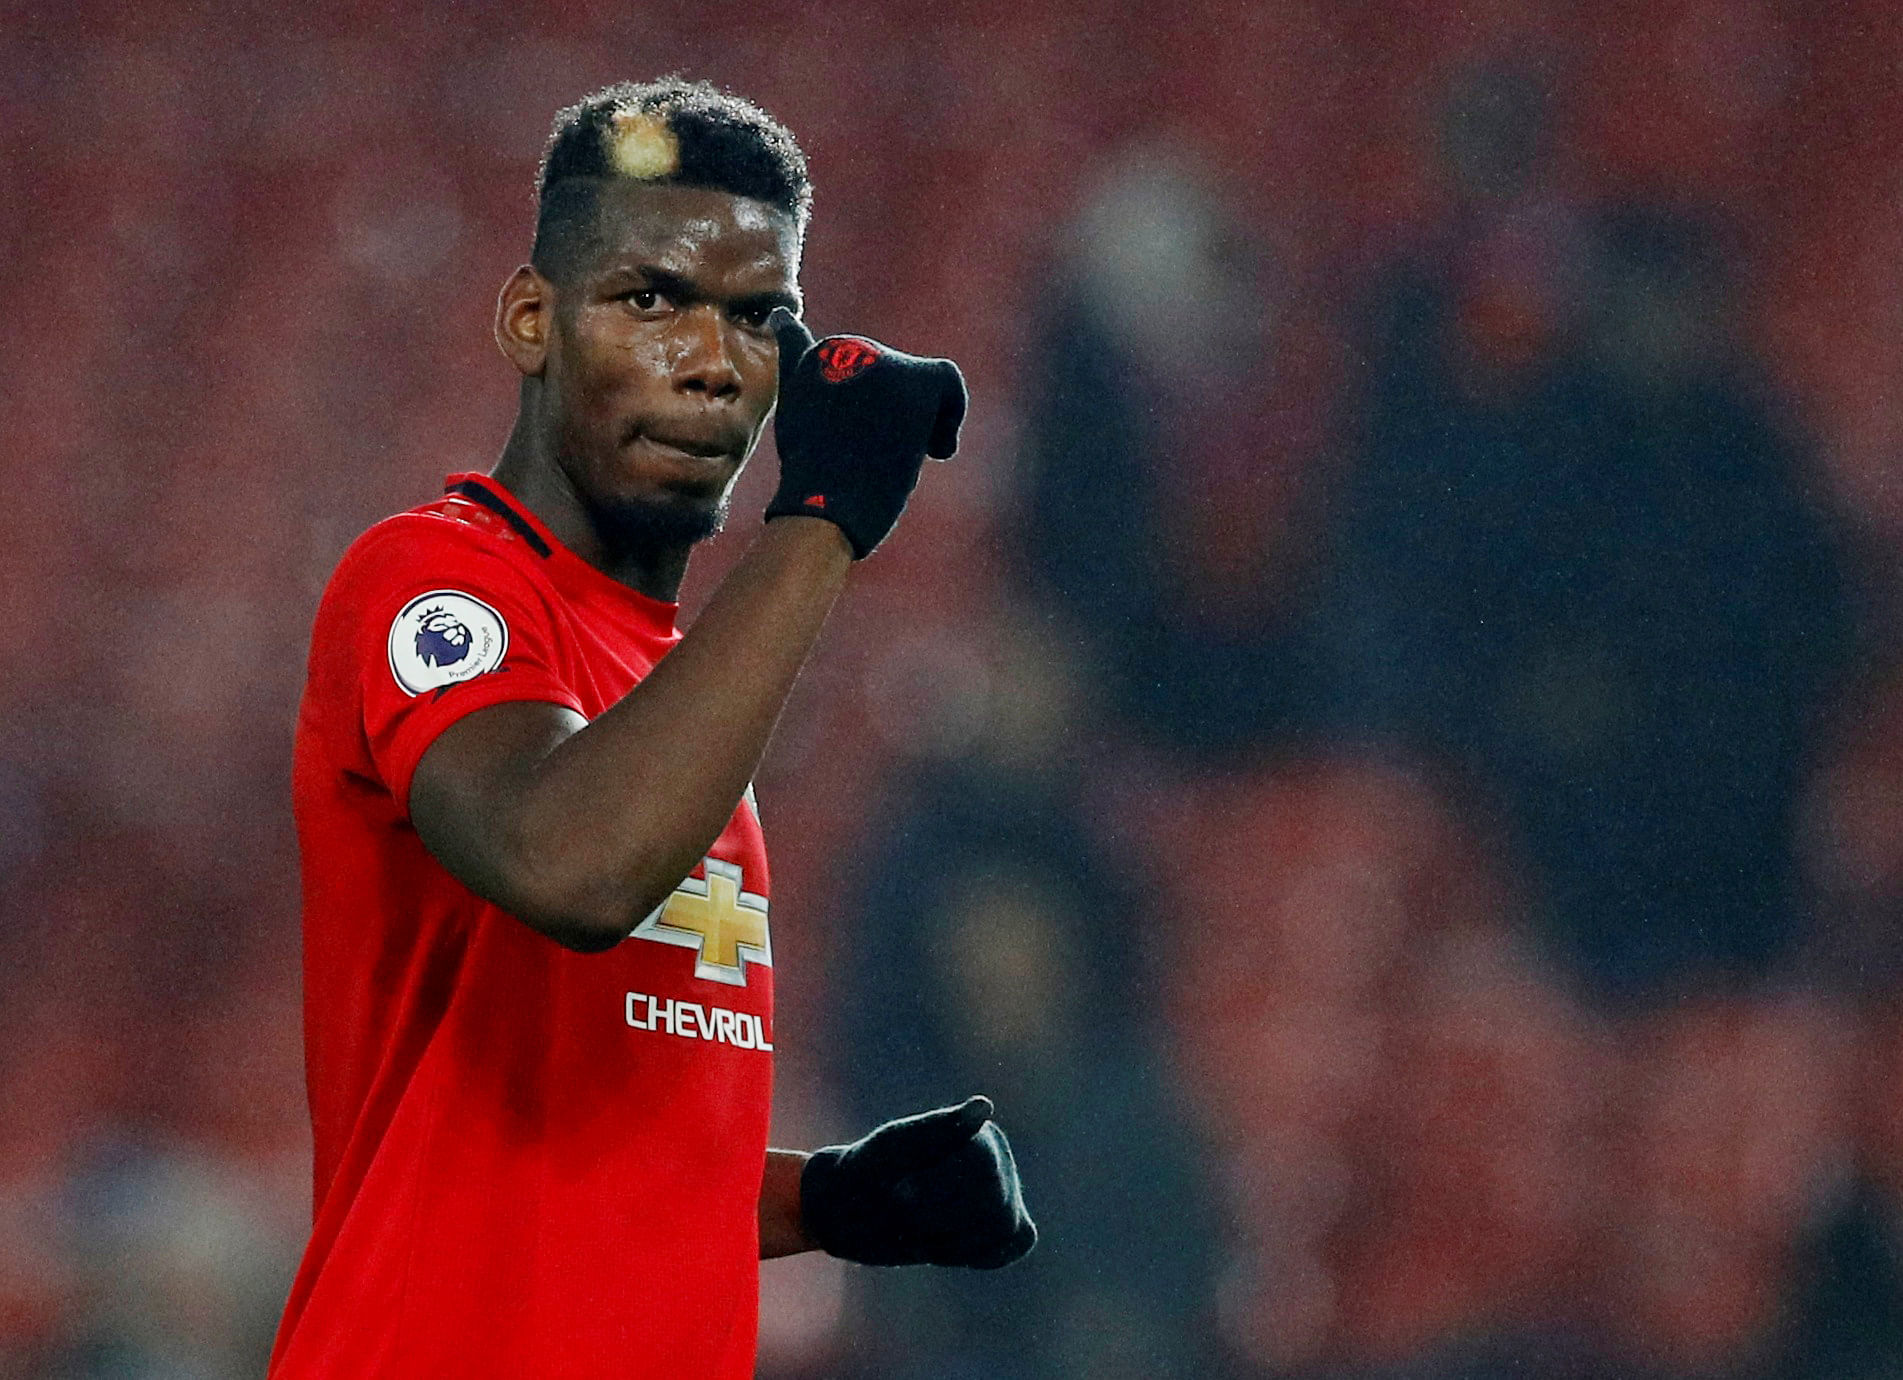 Manchester United's Paul Pogba acknowledges fans after the match. (Reuters Photo)